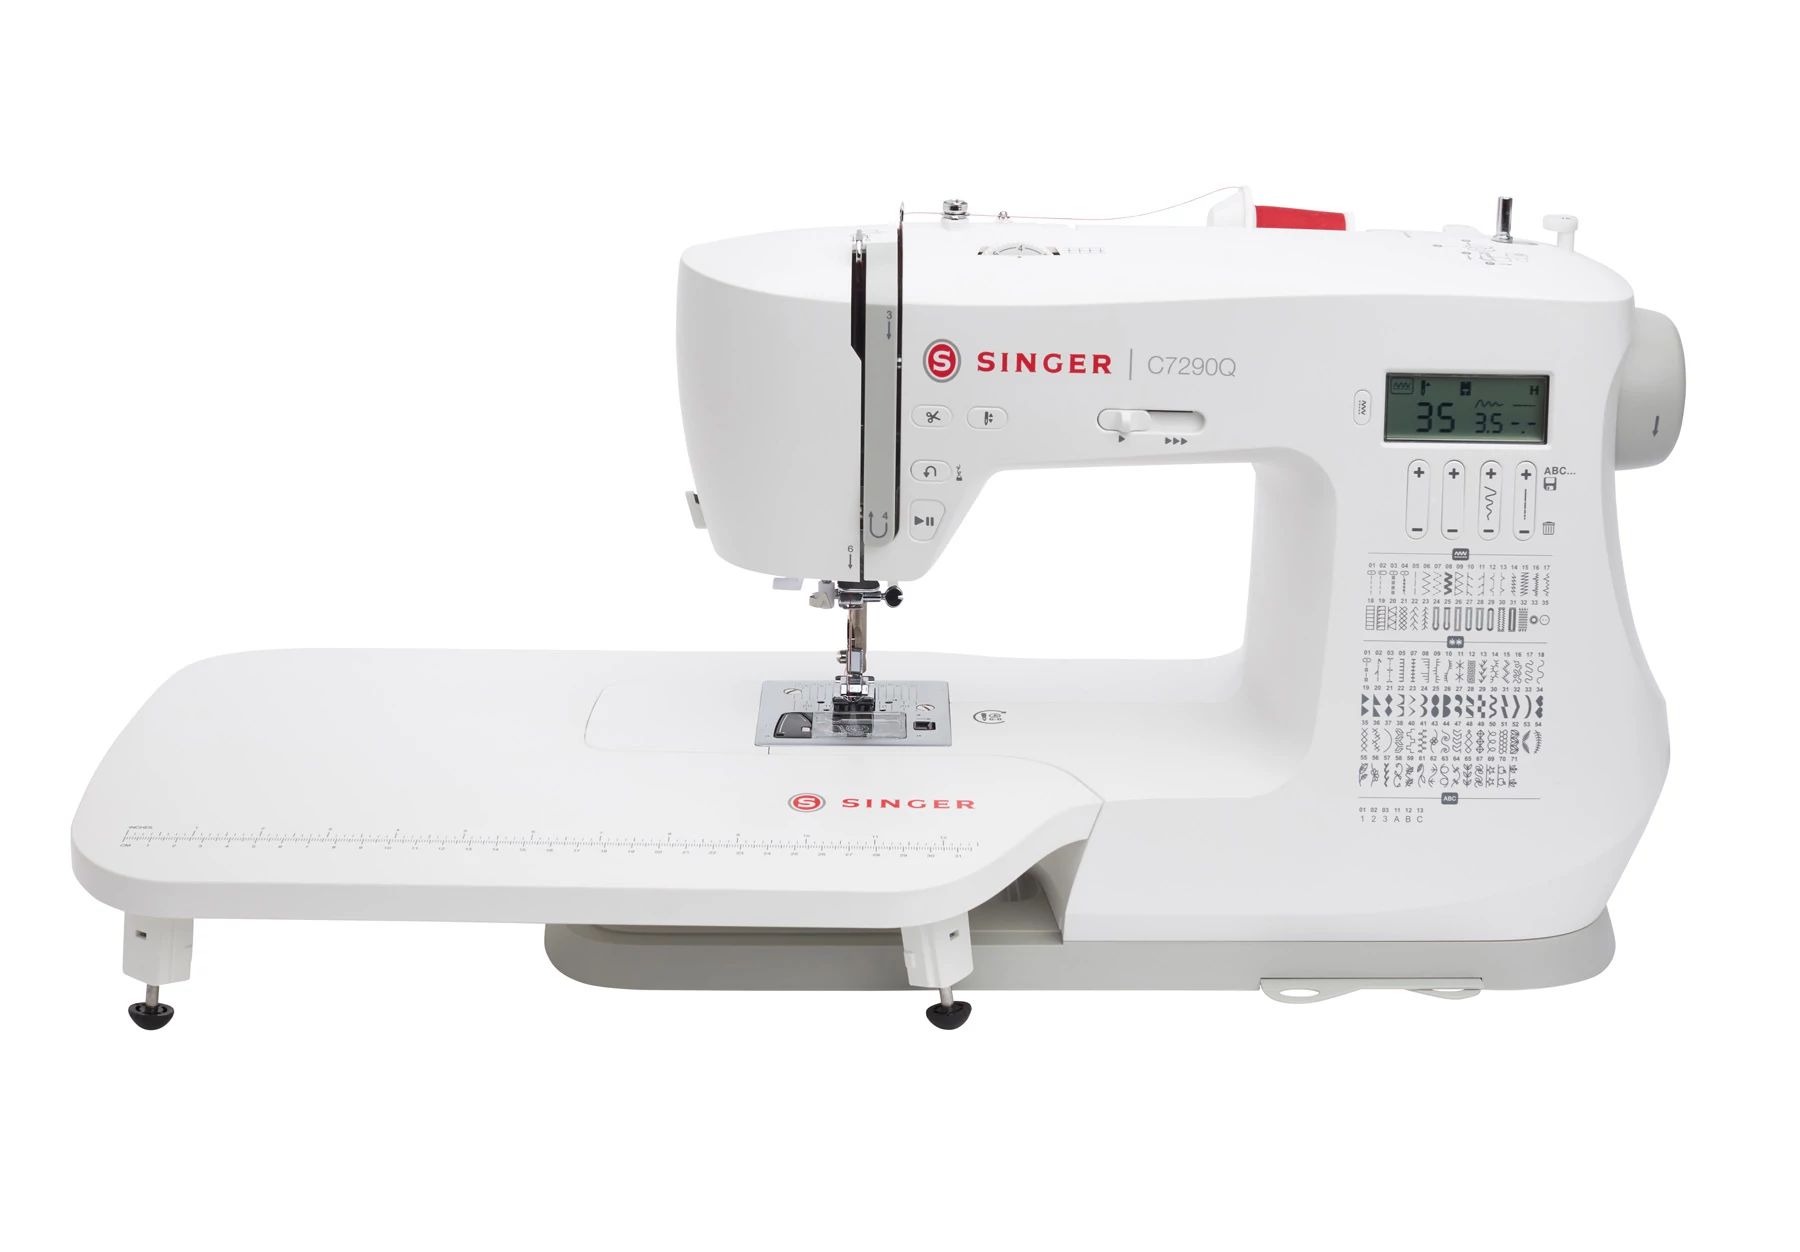 Singer sewing machine Demo, Electric sewing machine review